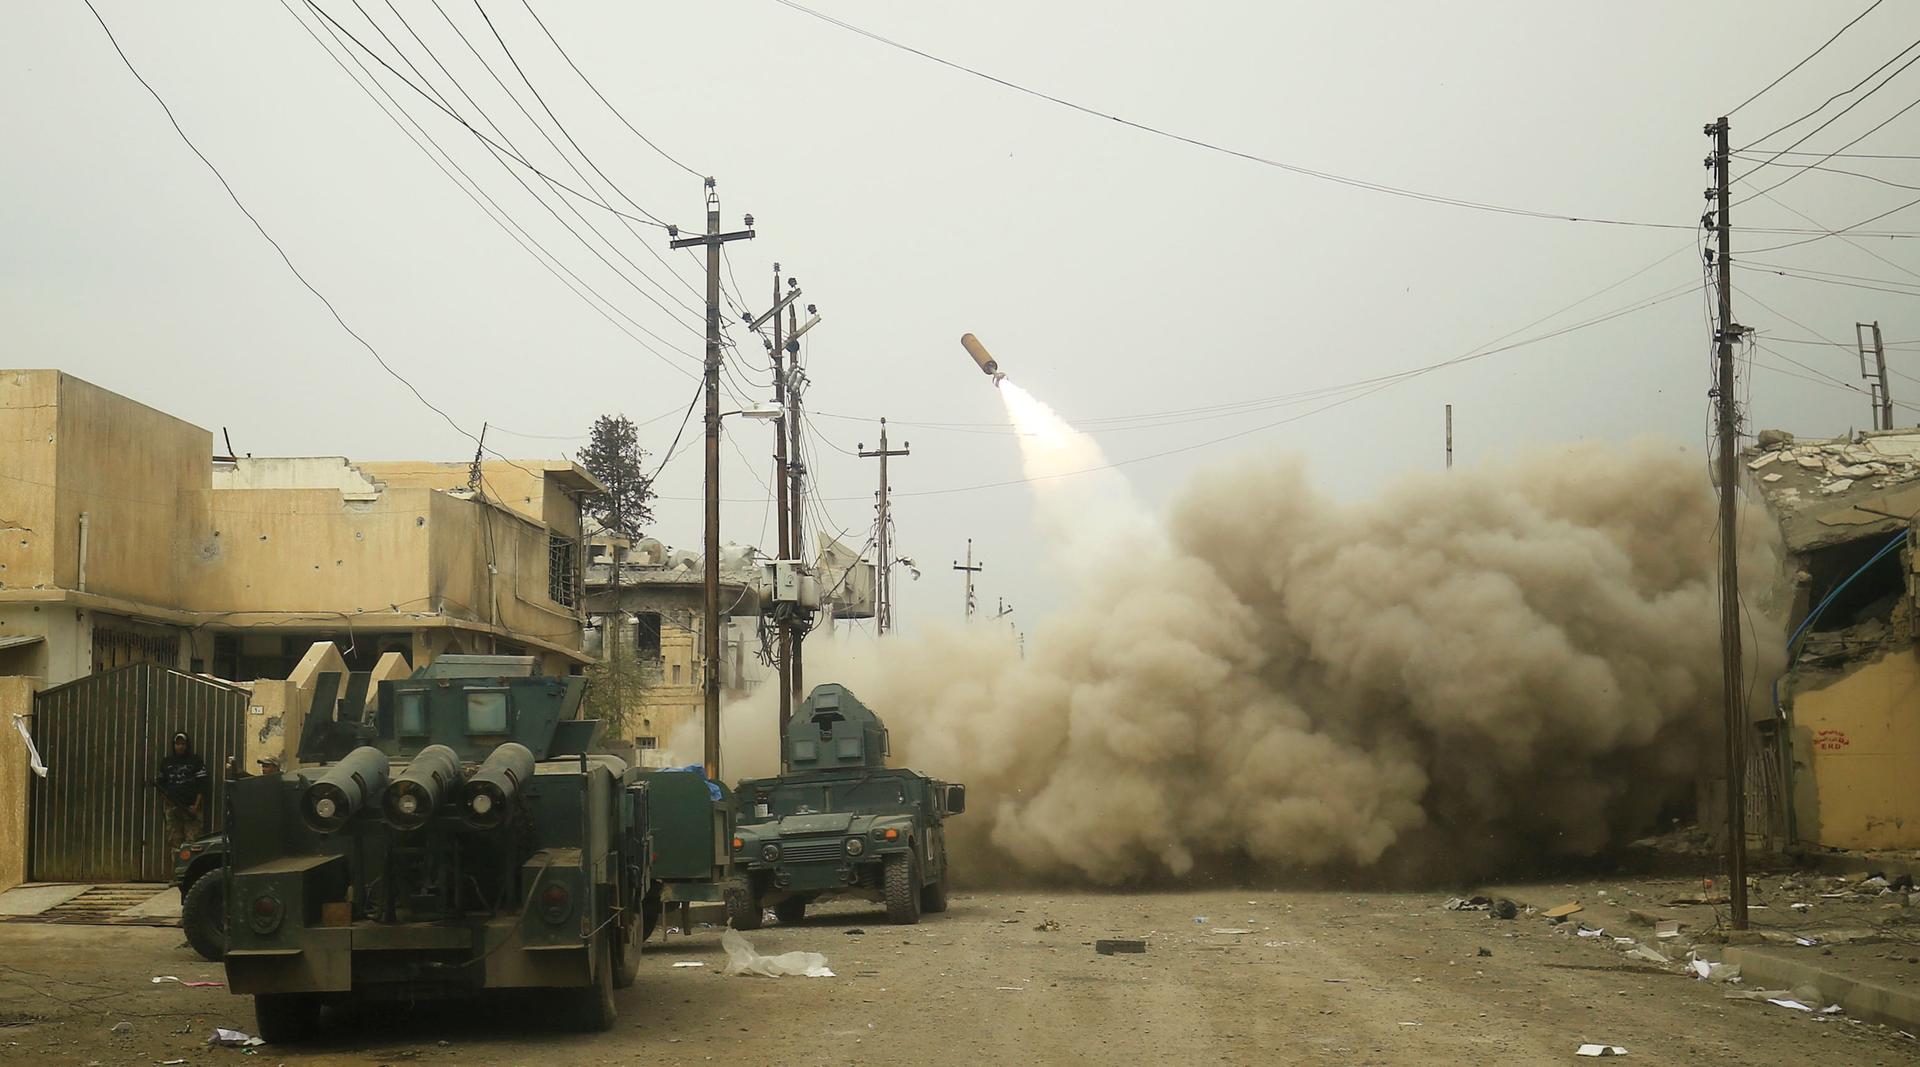 Iraqi rapid response members fire a missile against ISIS militants in Mosul, Iraq, on March 11.